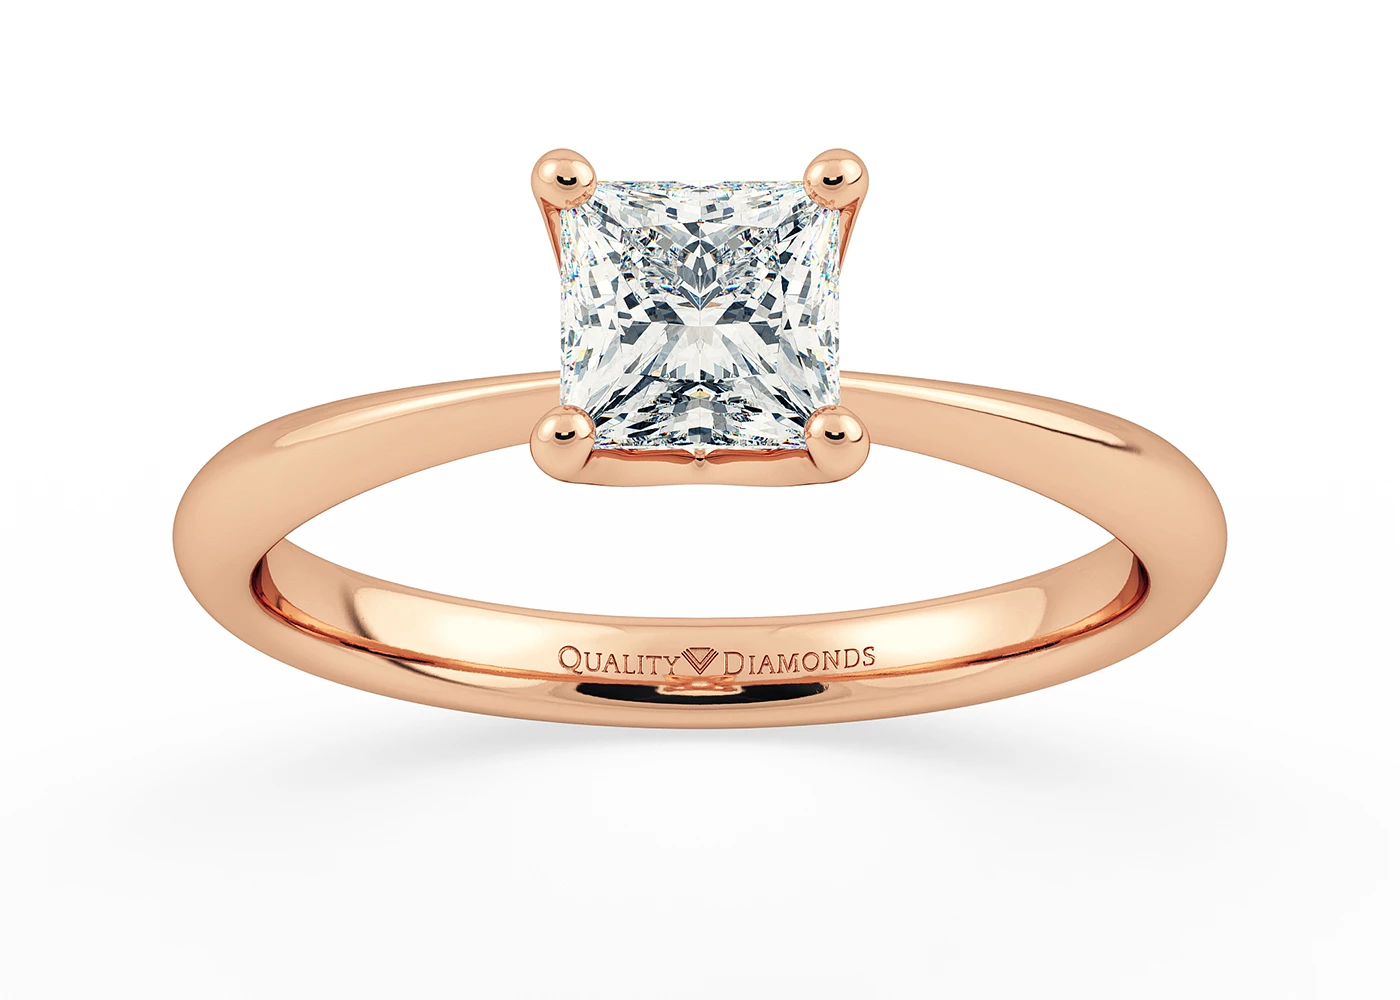 Two Carat Princess Solitaire Diamond Engagement Ring in 18K Rose Gold